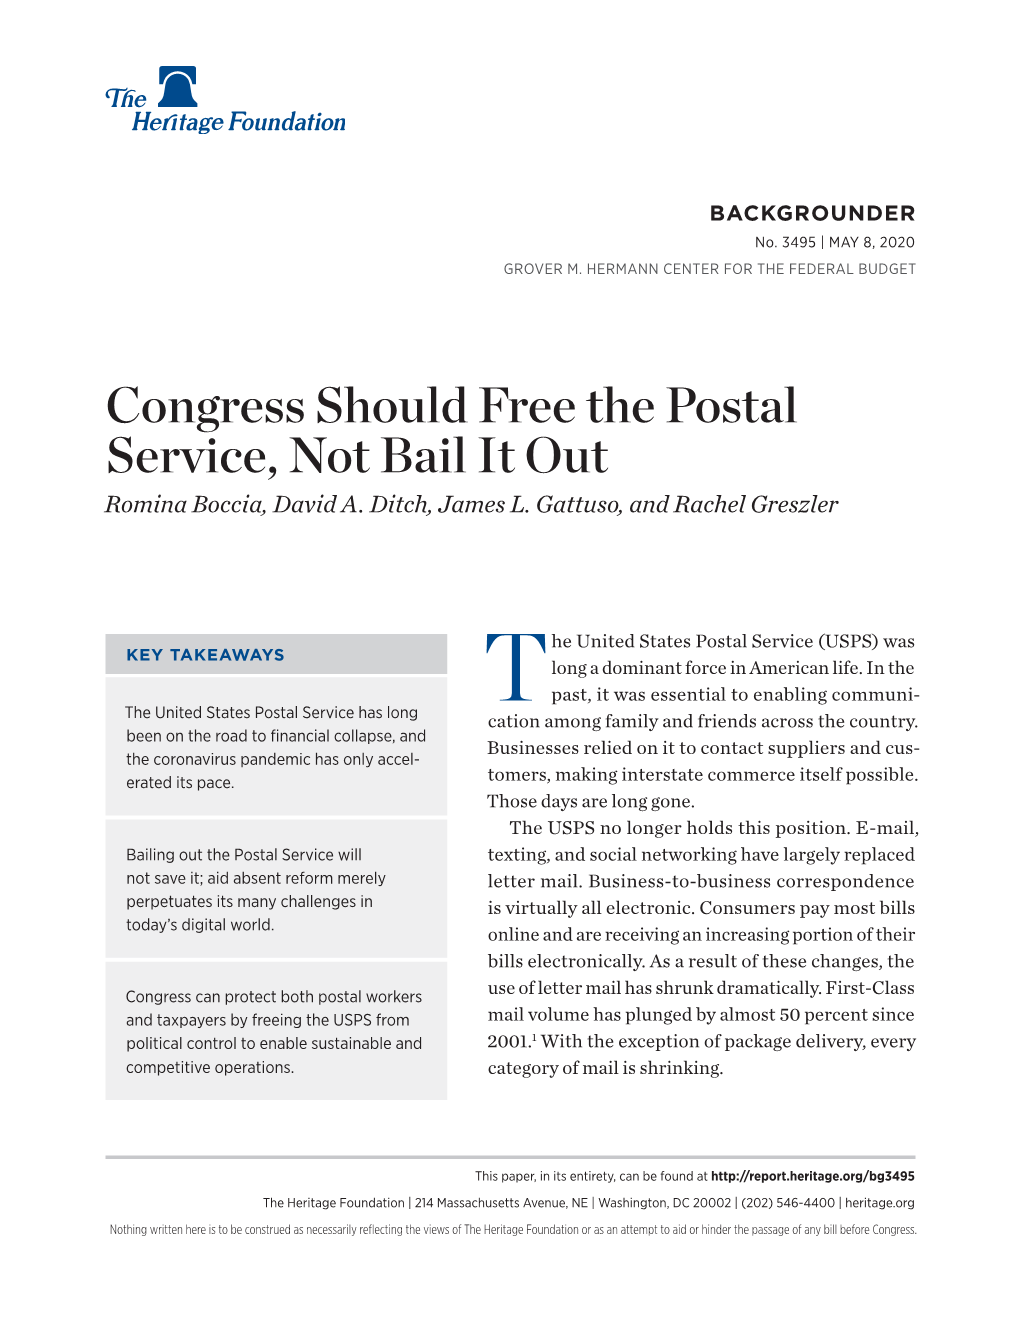 Congress Should Free the Postal Service, Not Bail It out Romina Boccia, David A